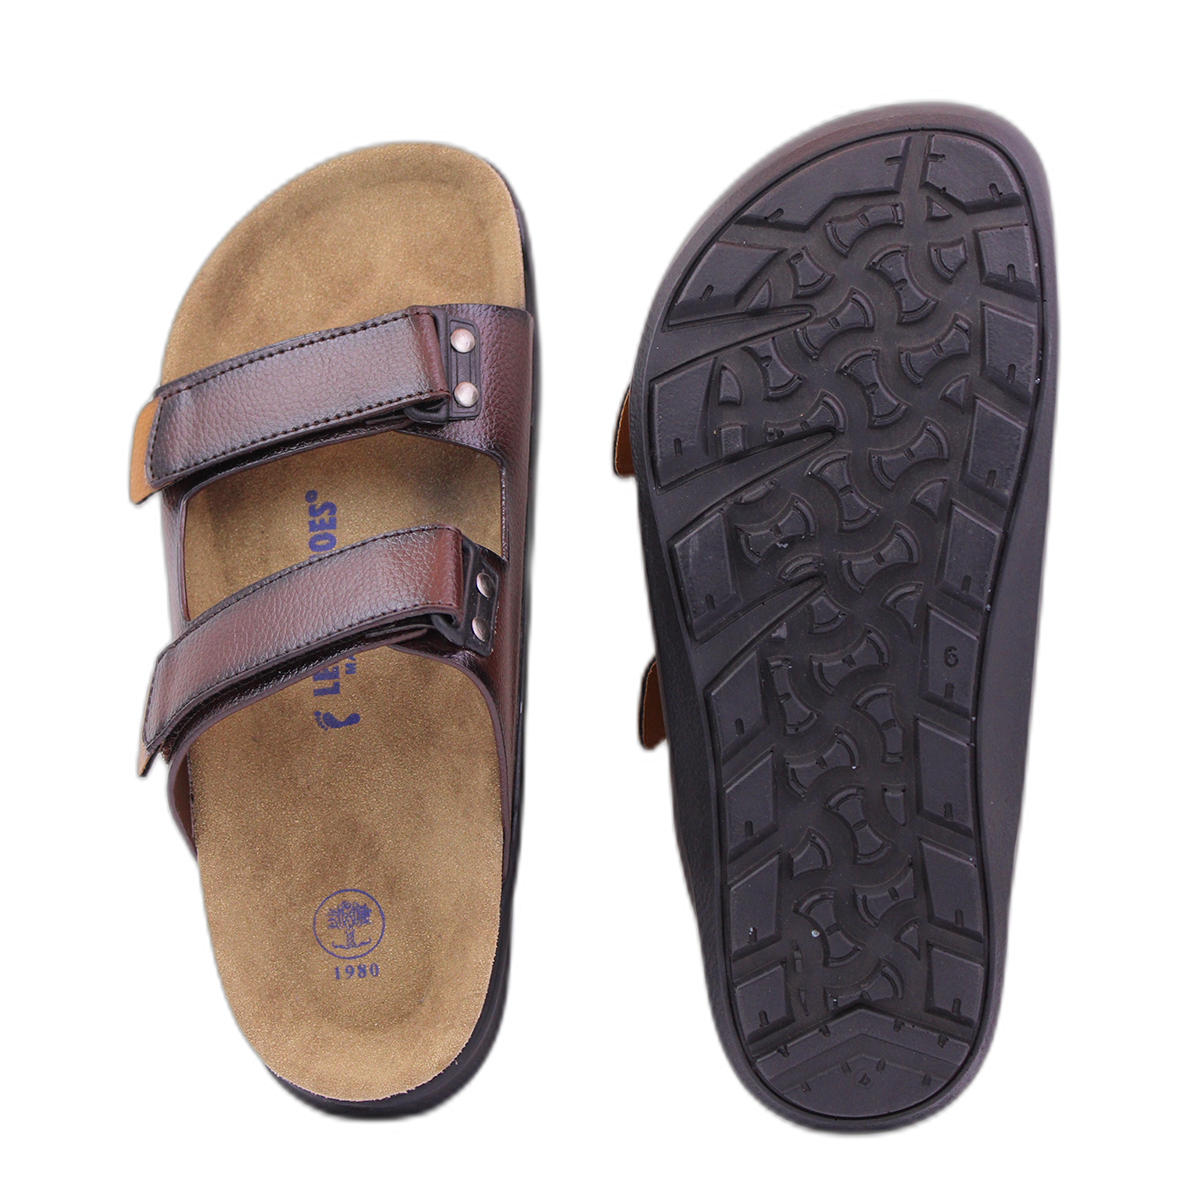 Crocs Heels And Wedges For Womens Online India At Best Price - Crocs™ India